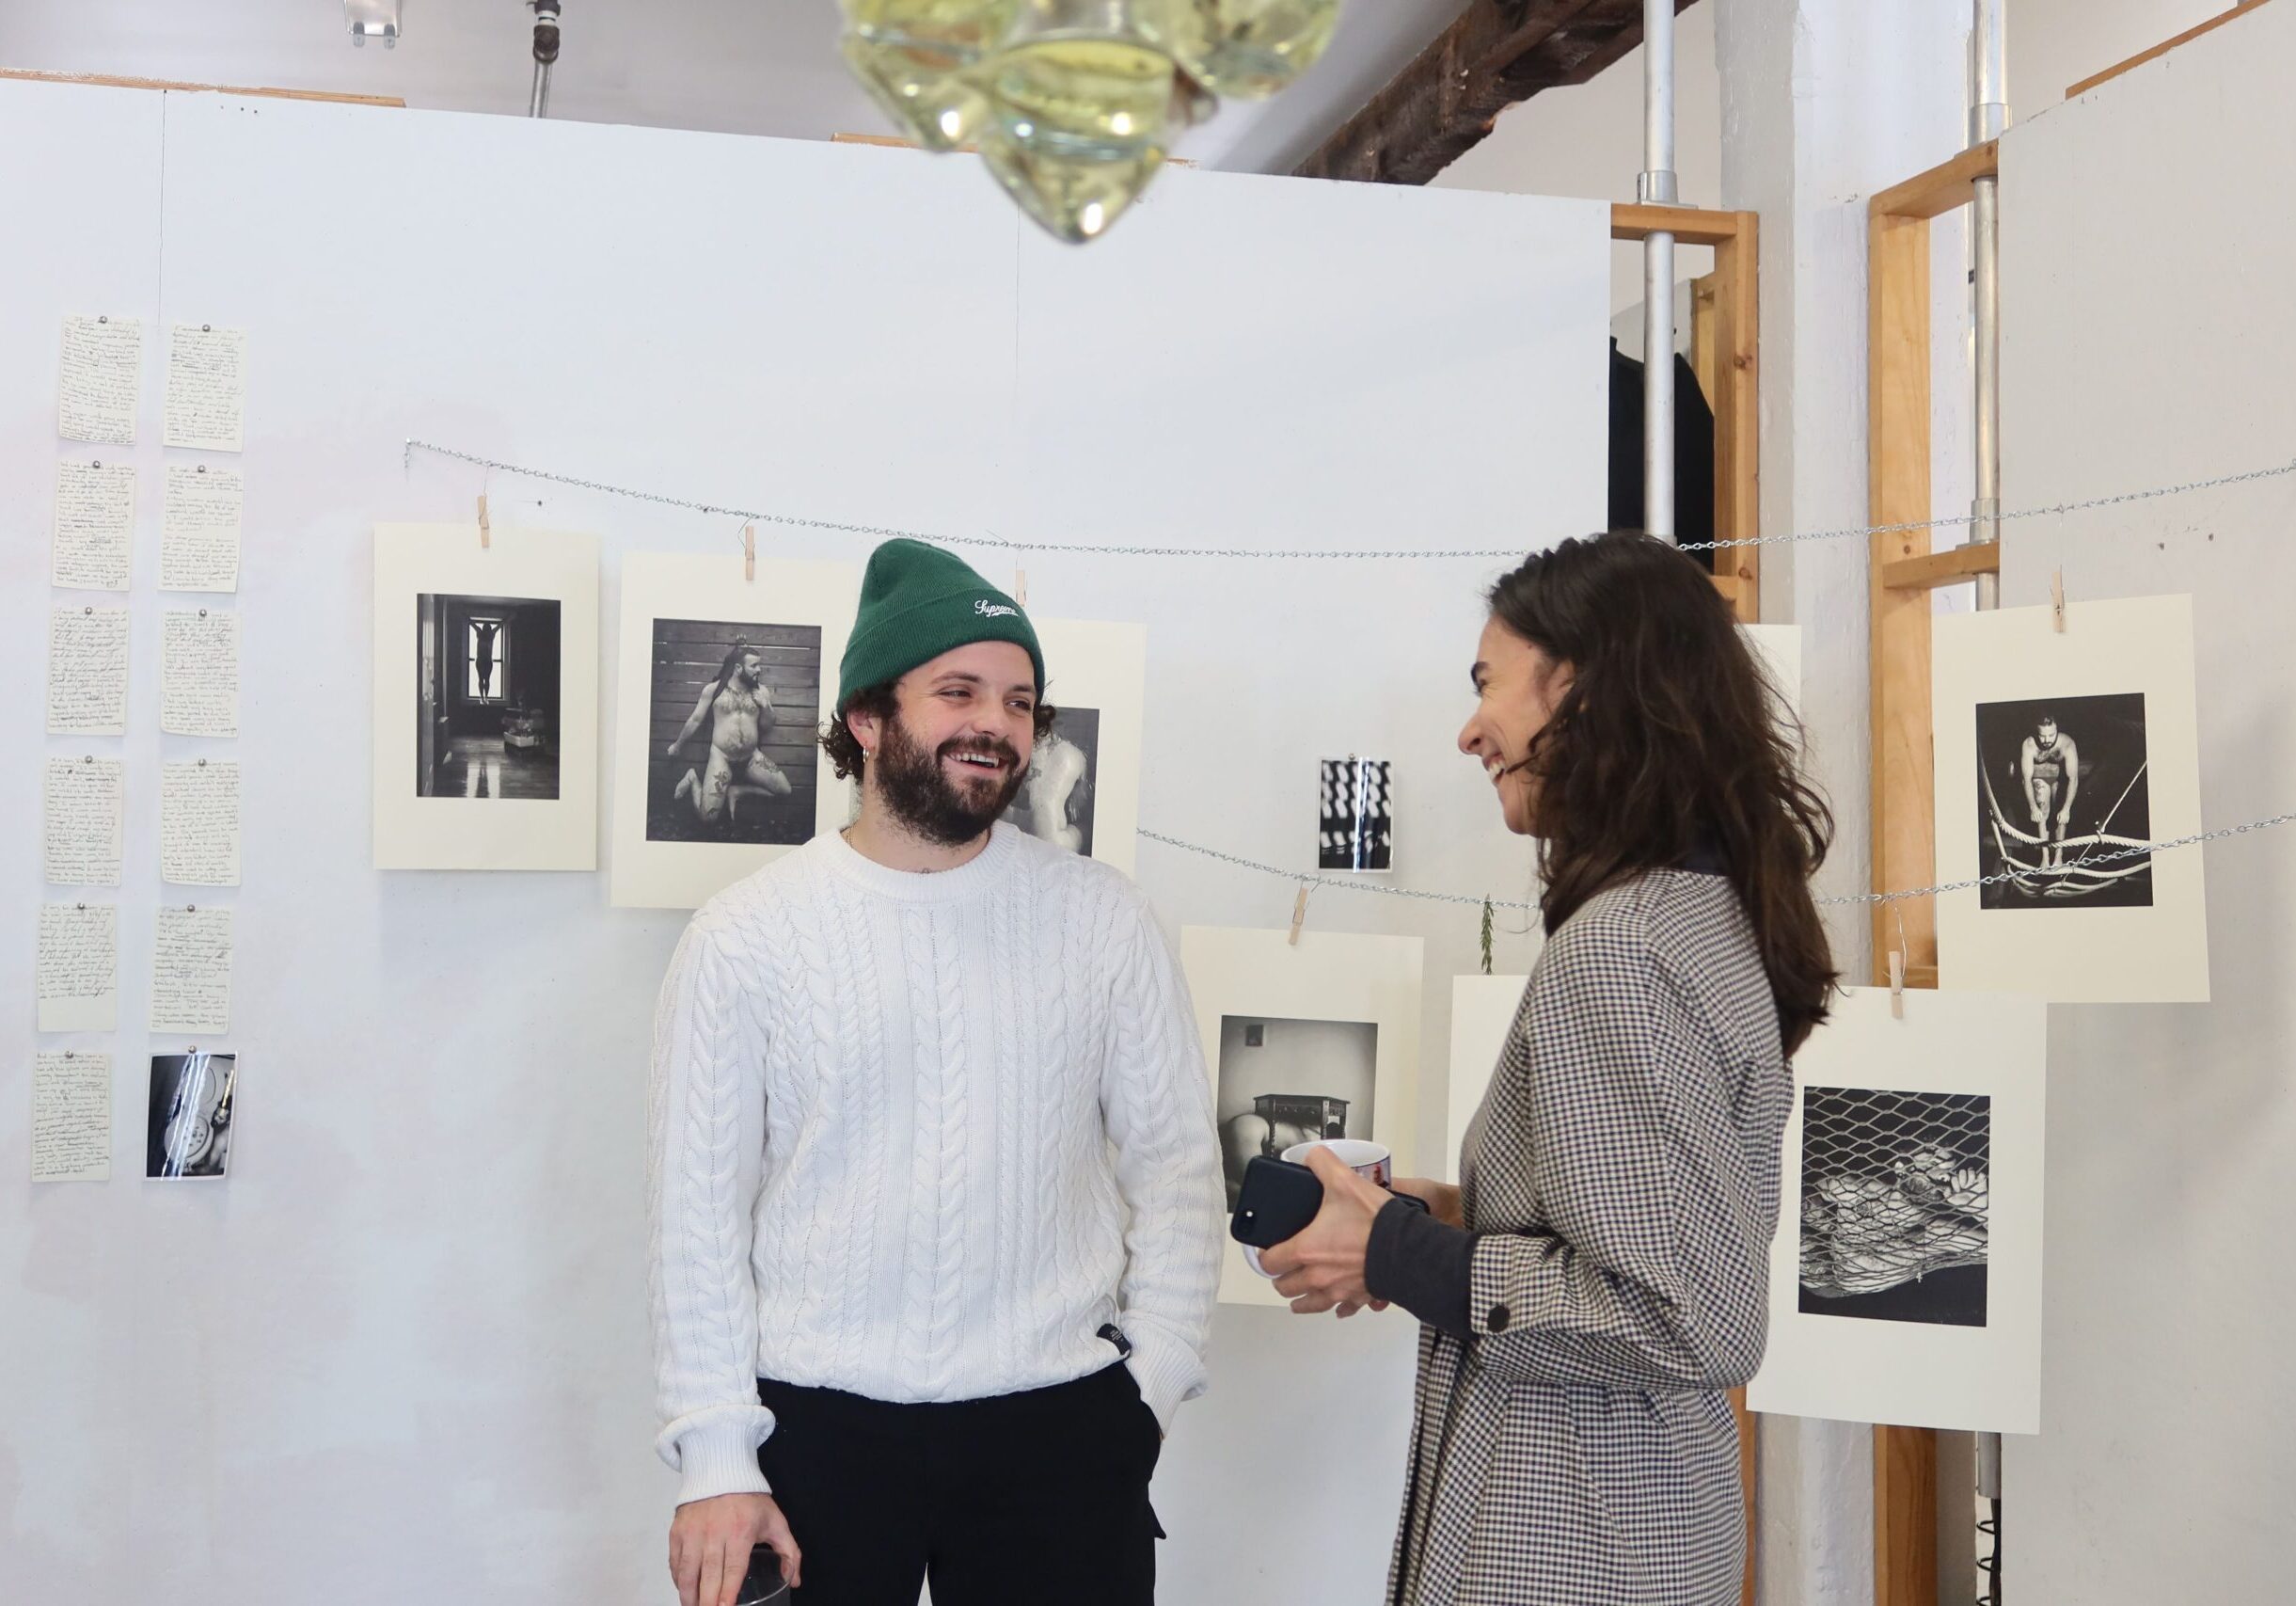 Javier Piñero with Ana Fiore at Open Studios at The Arts Center at Governors Island, Photo by Zheng Du